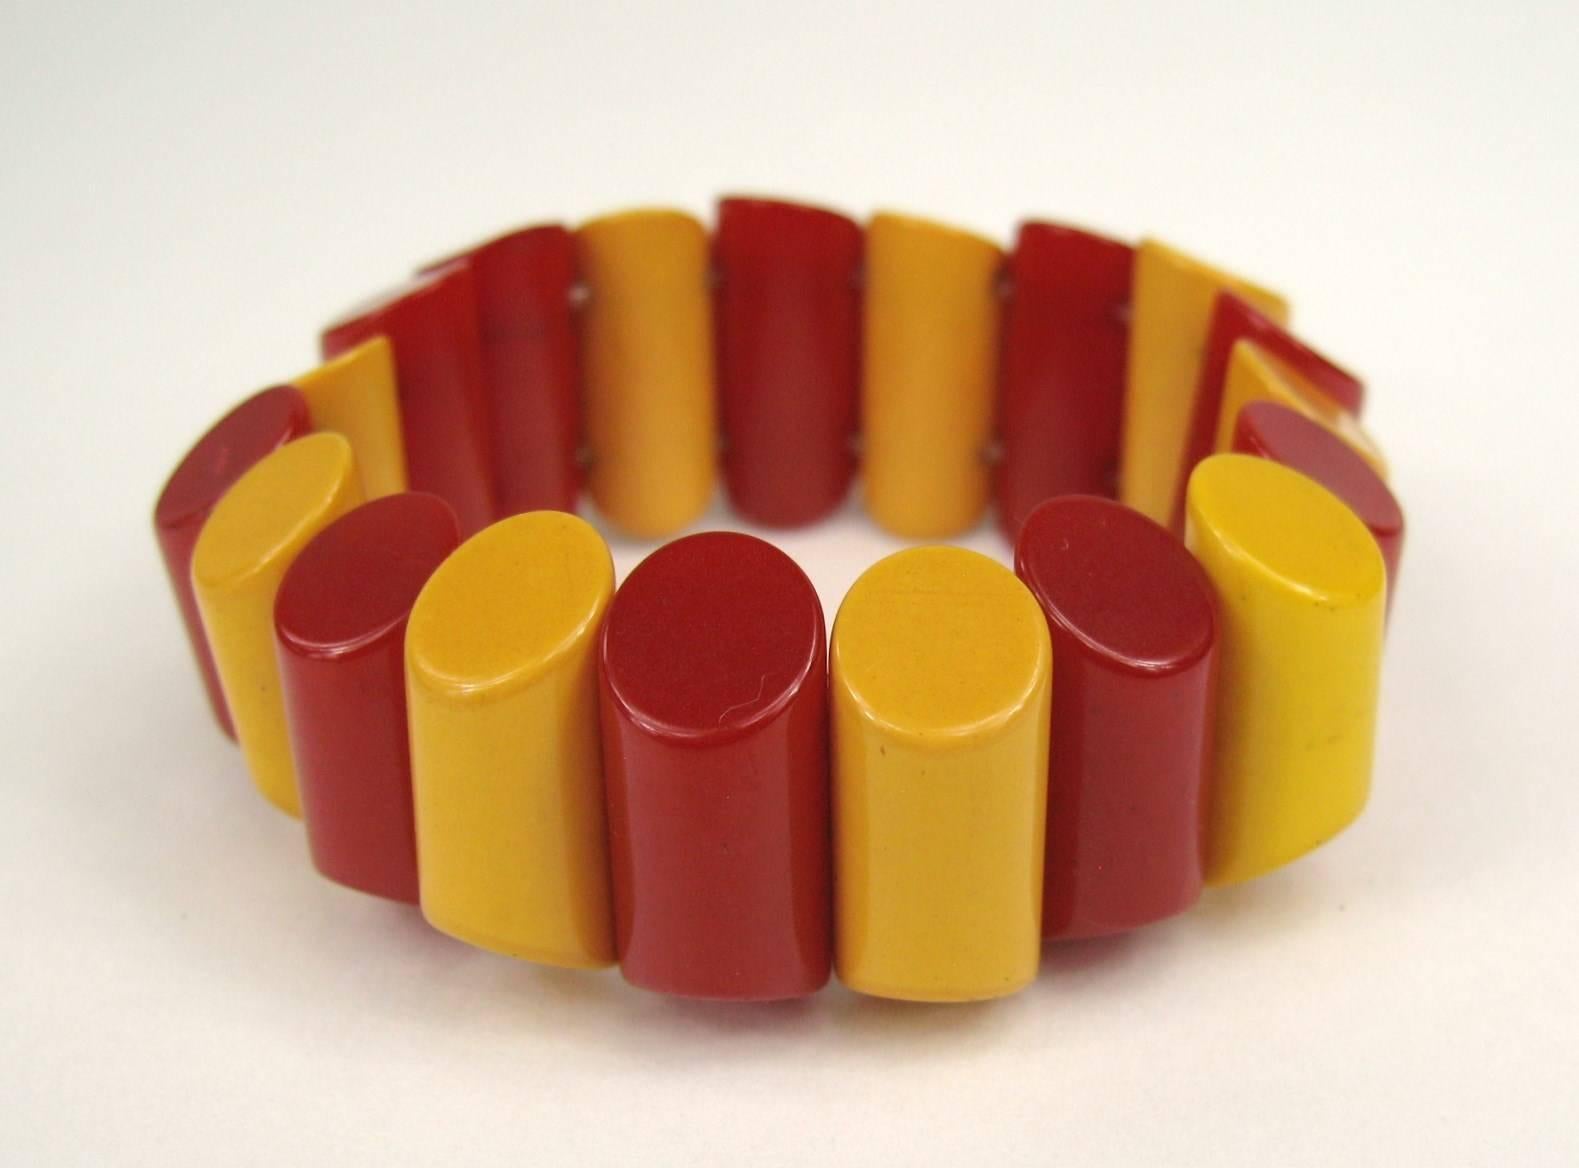 A fun vintage Bakelite / Catalin stretch bracelet in a rich butterscotch and Cherry. The bracelet is made up of narrow strips of Bakelite strung on heavy elastic. The thin panels have rounded edges, the top and bottom edges are angled down, the